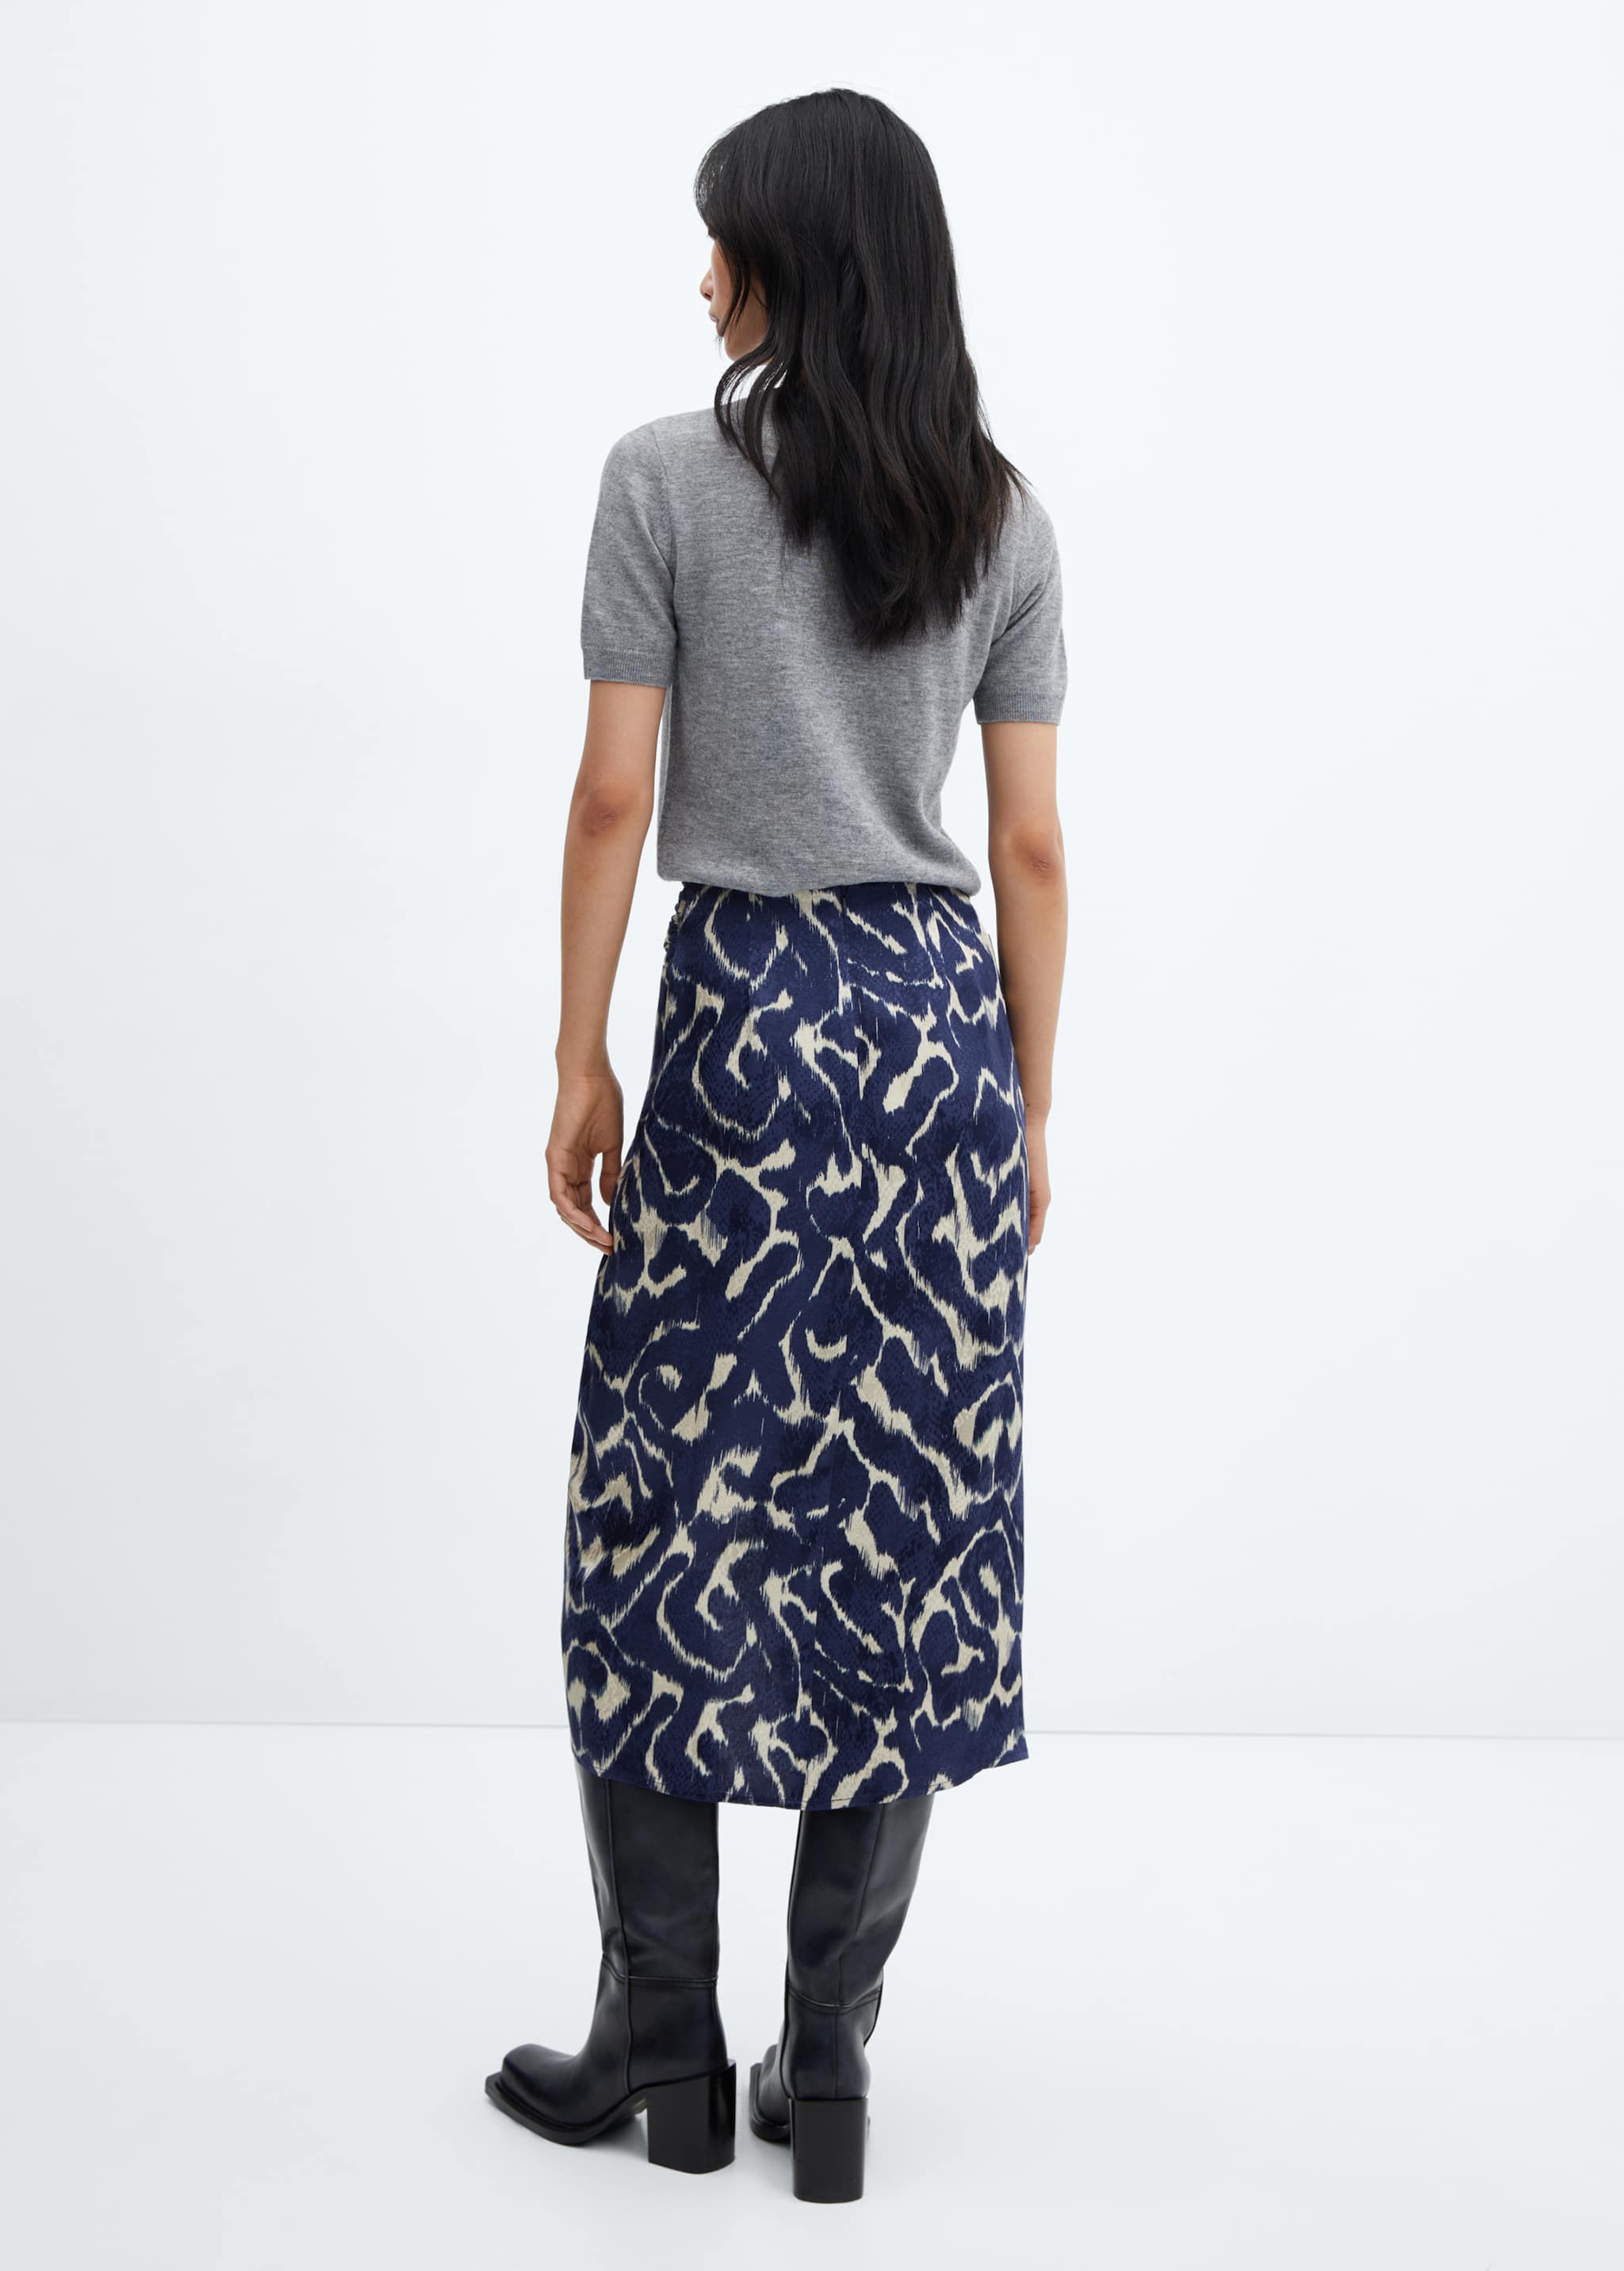 Knot printed skirt - Reverse of the article